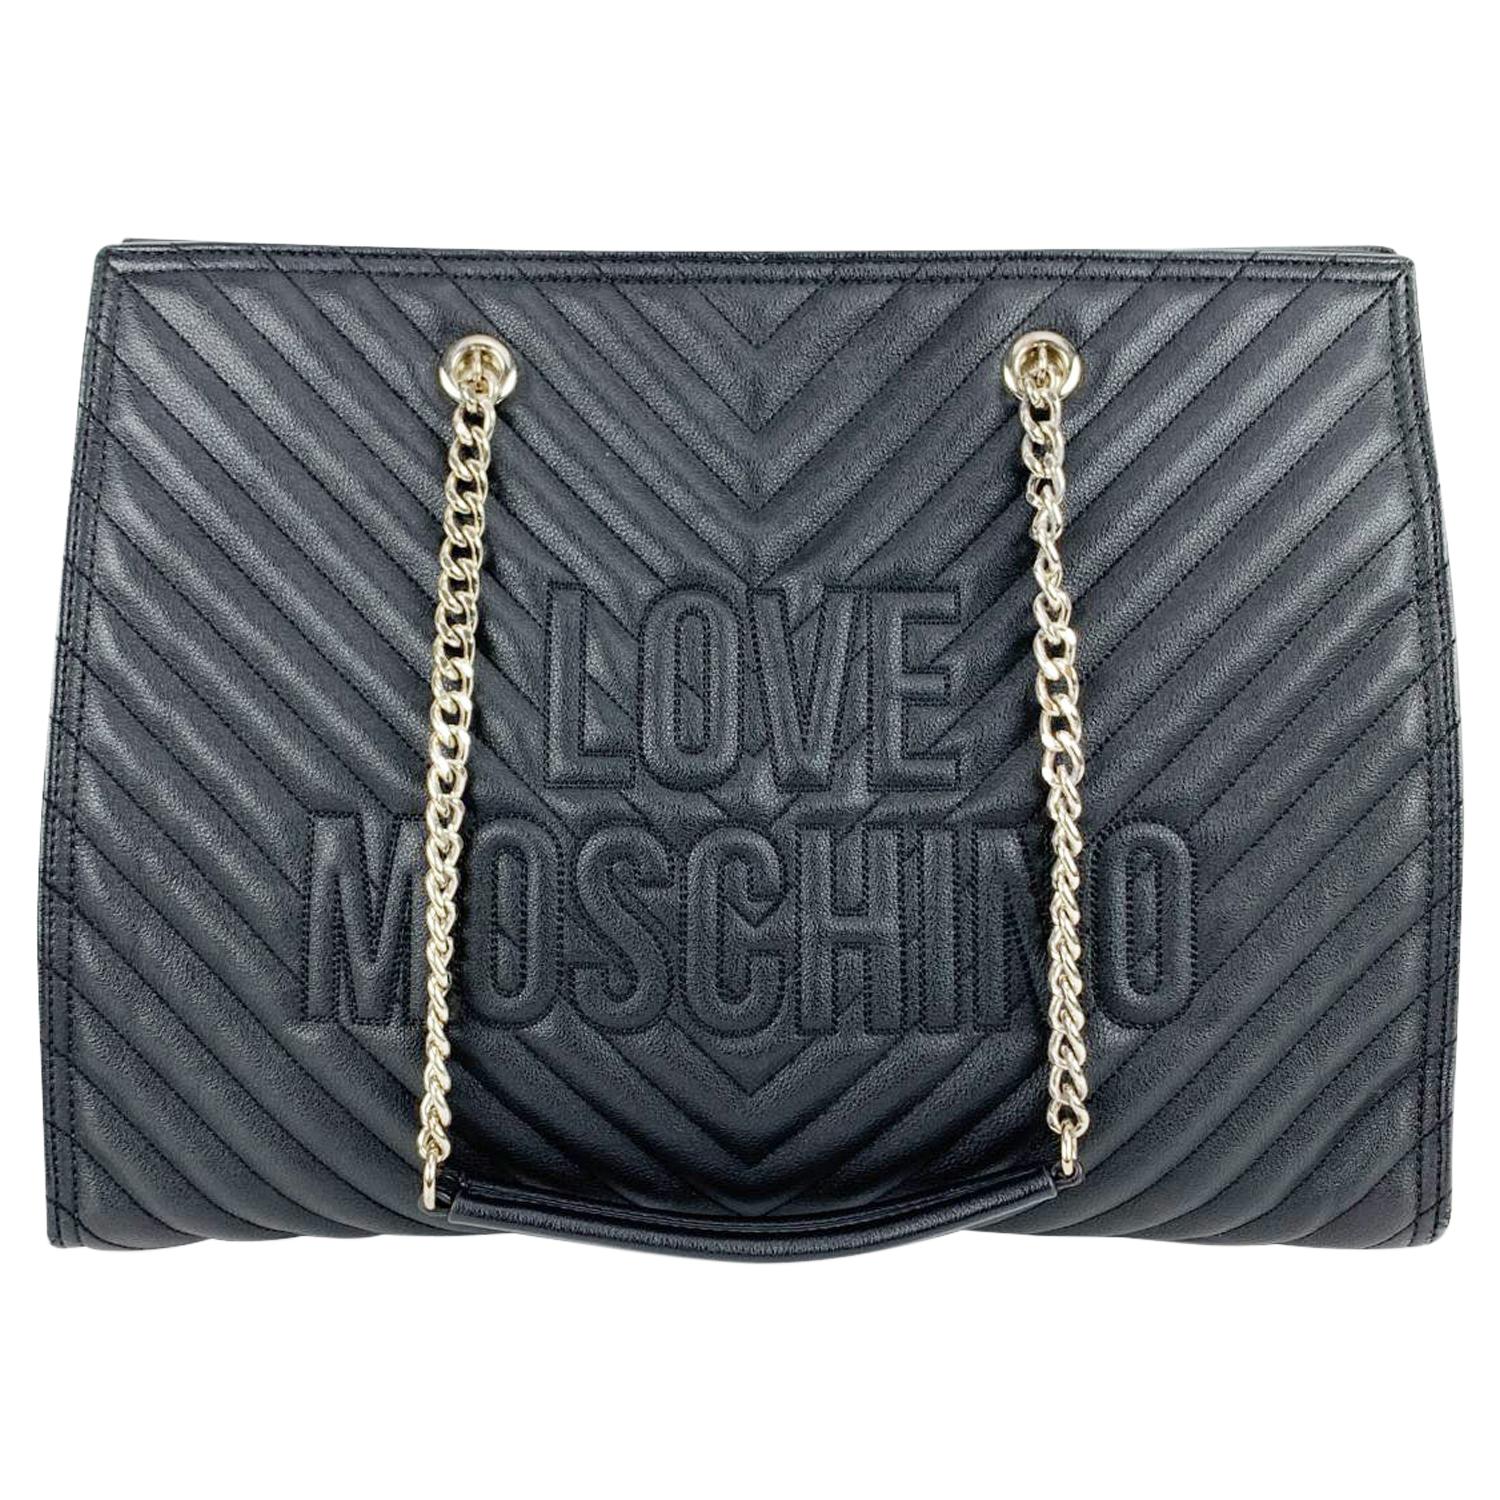 Love Moschino Black Quilled Canvas Chevron Tote Shoulder Bag